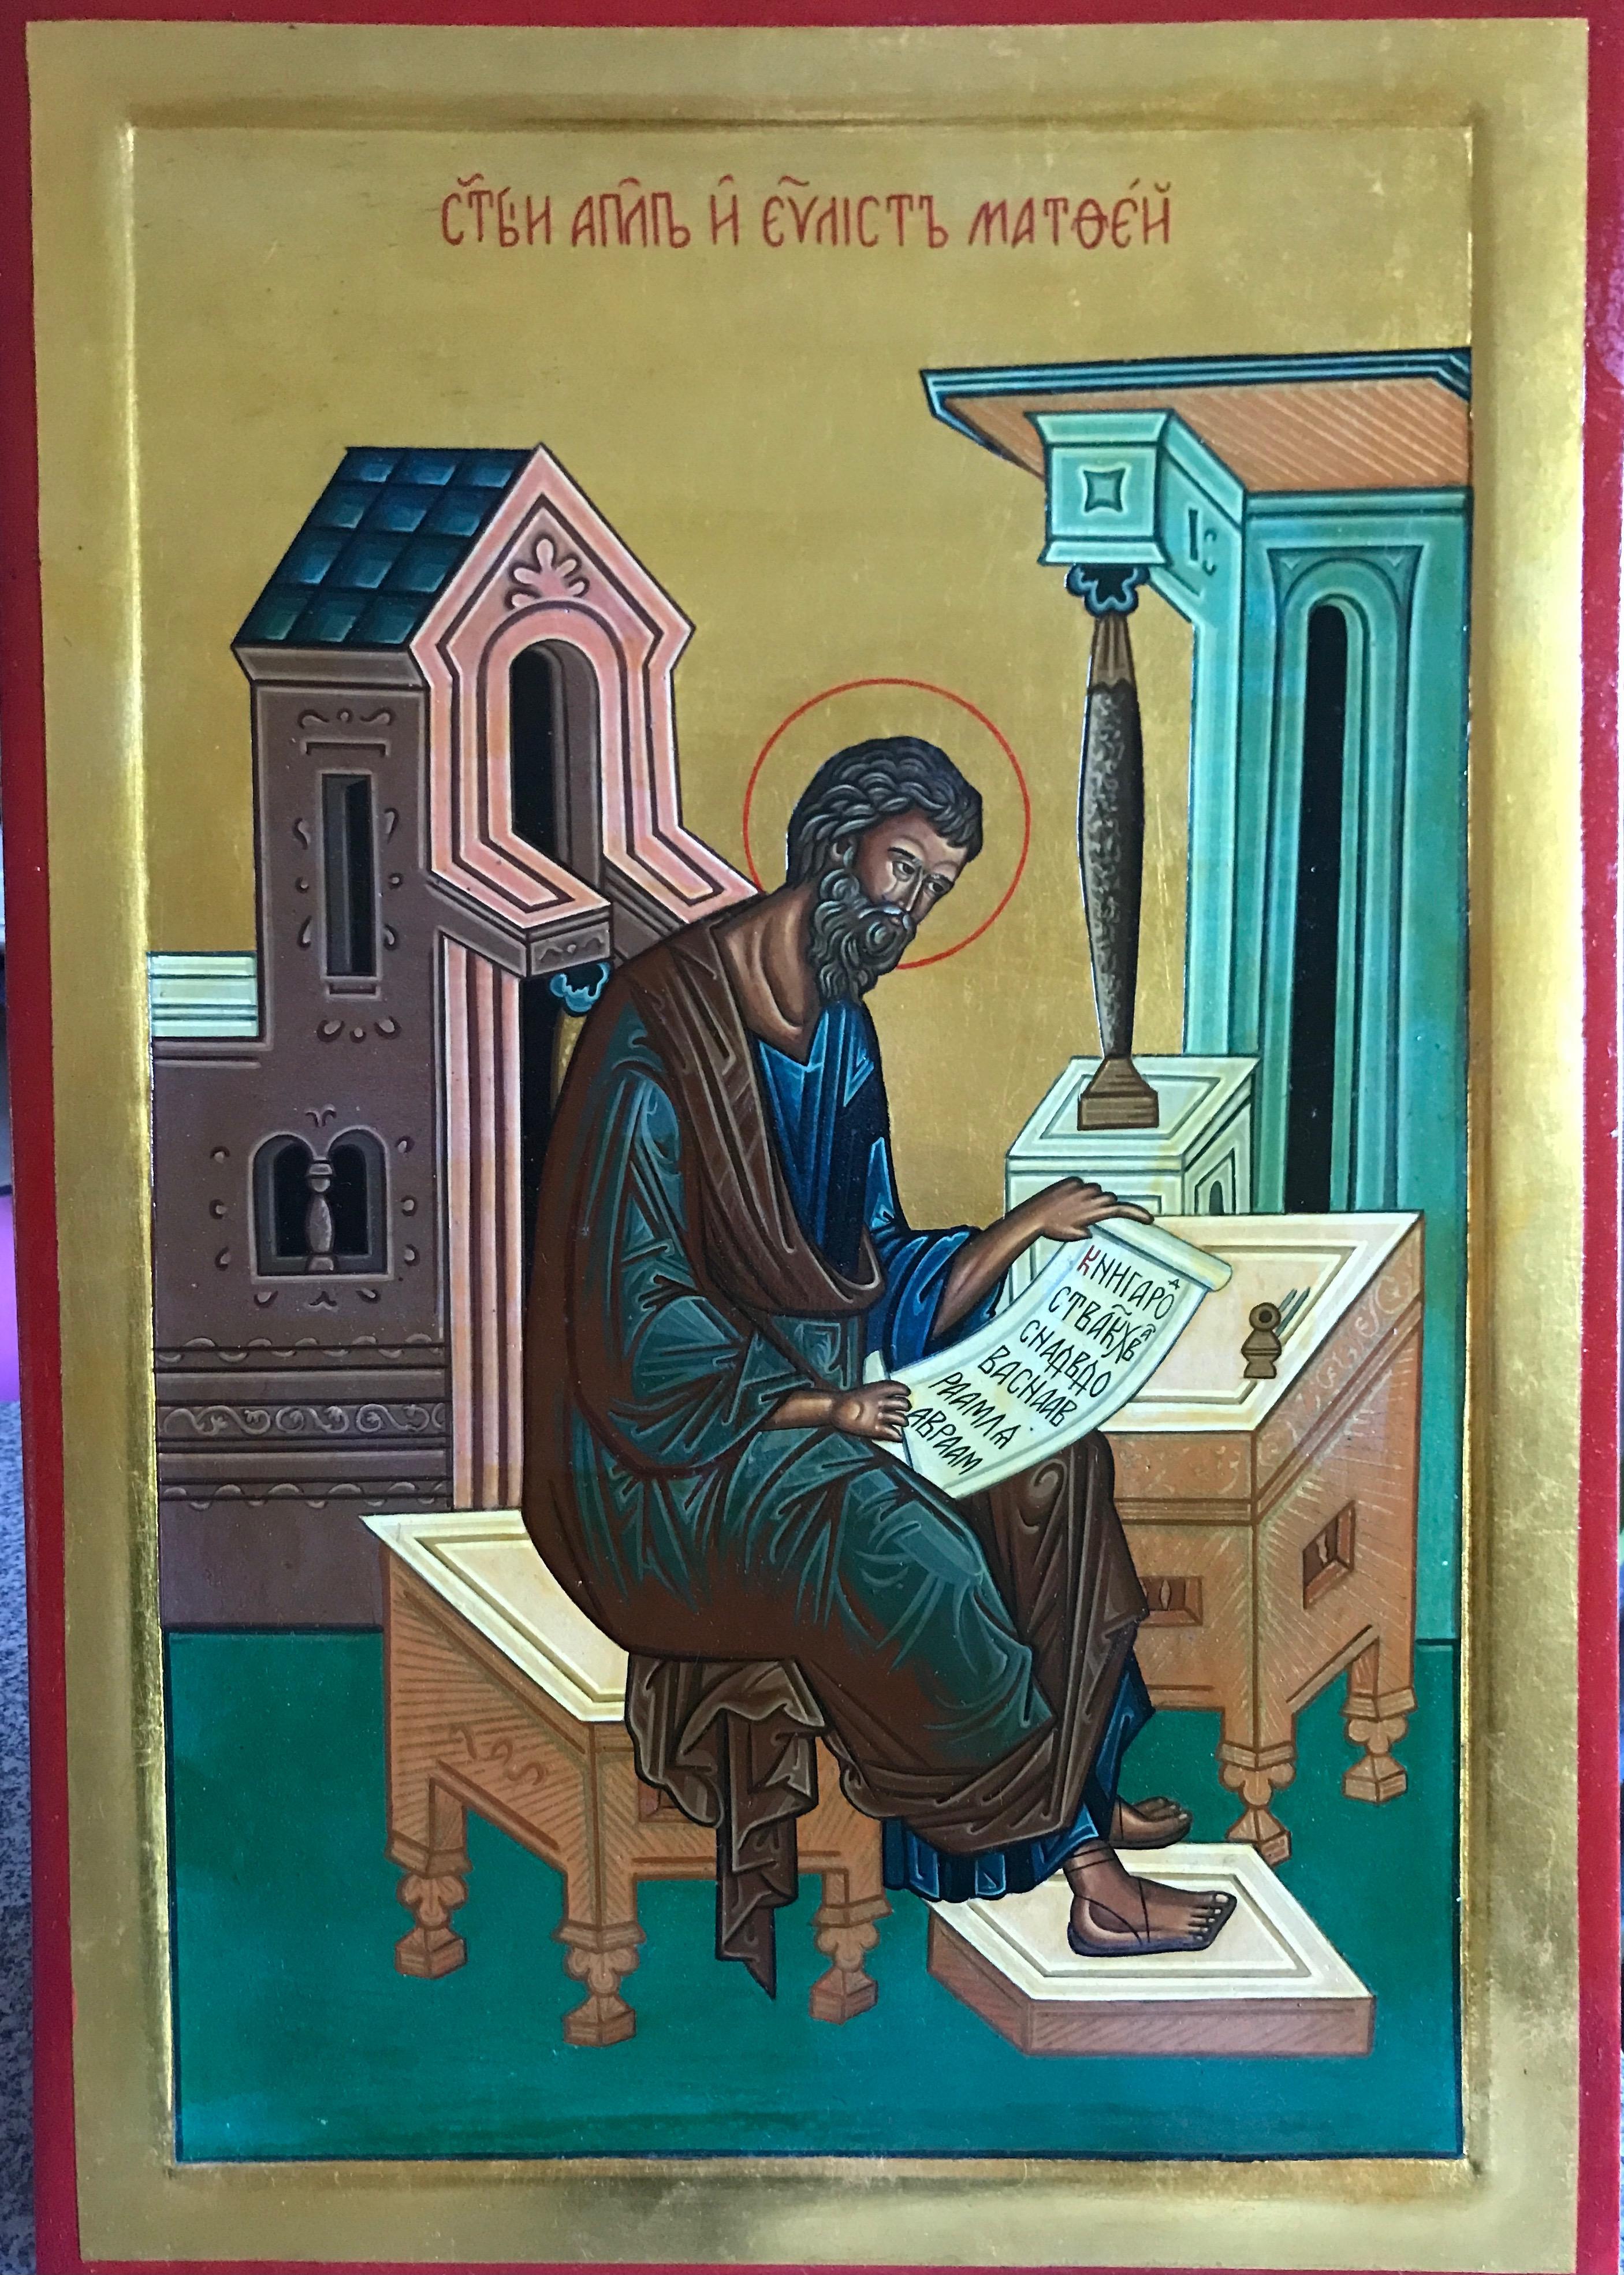 The Evangelist Matthew, after a Russian icon, school of Moscow, 15th century